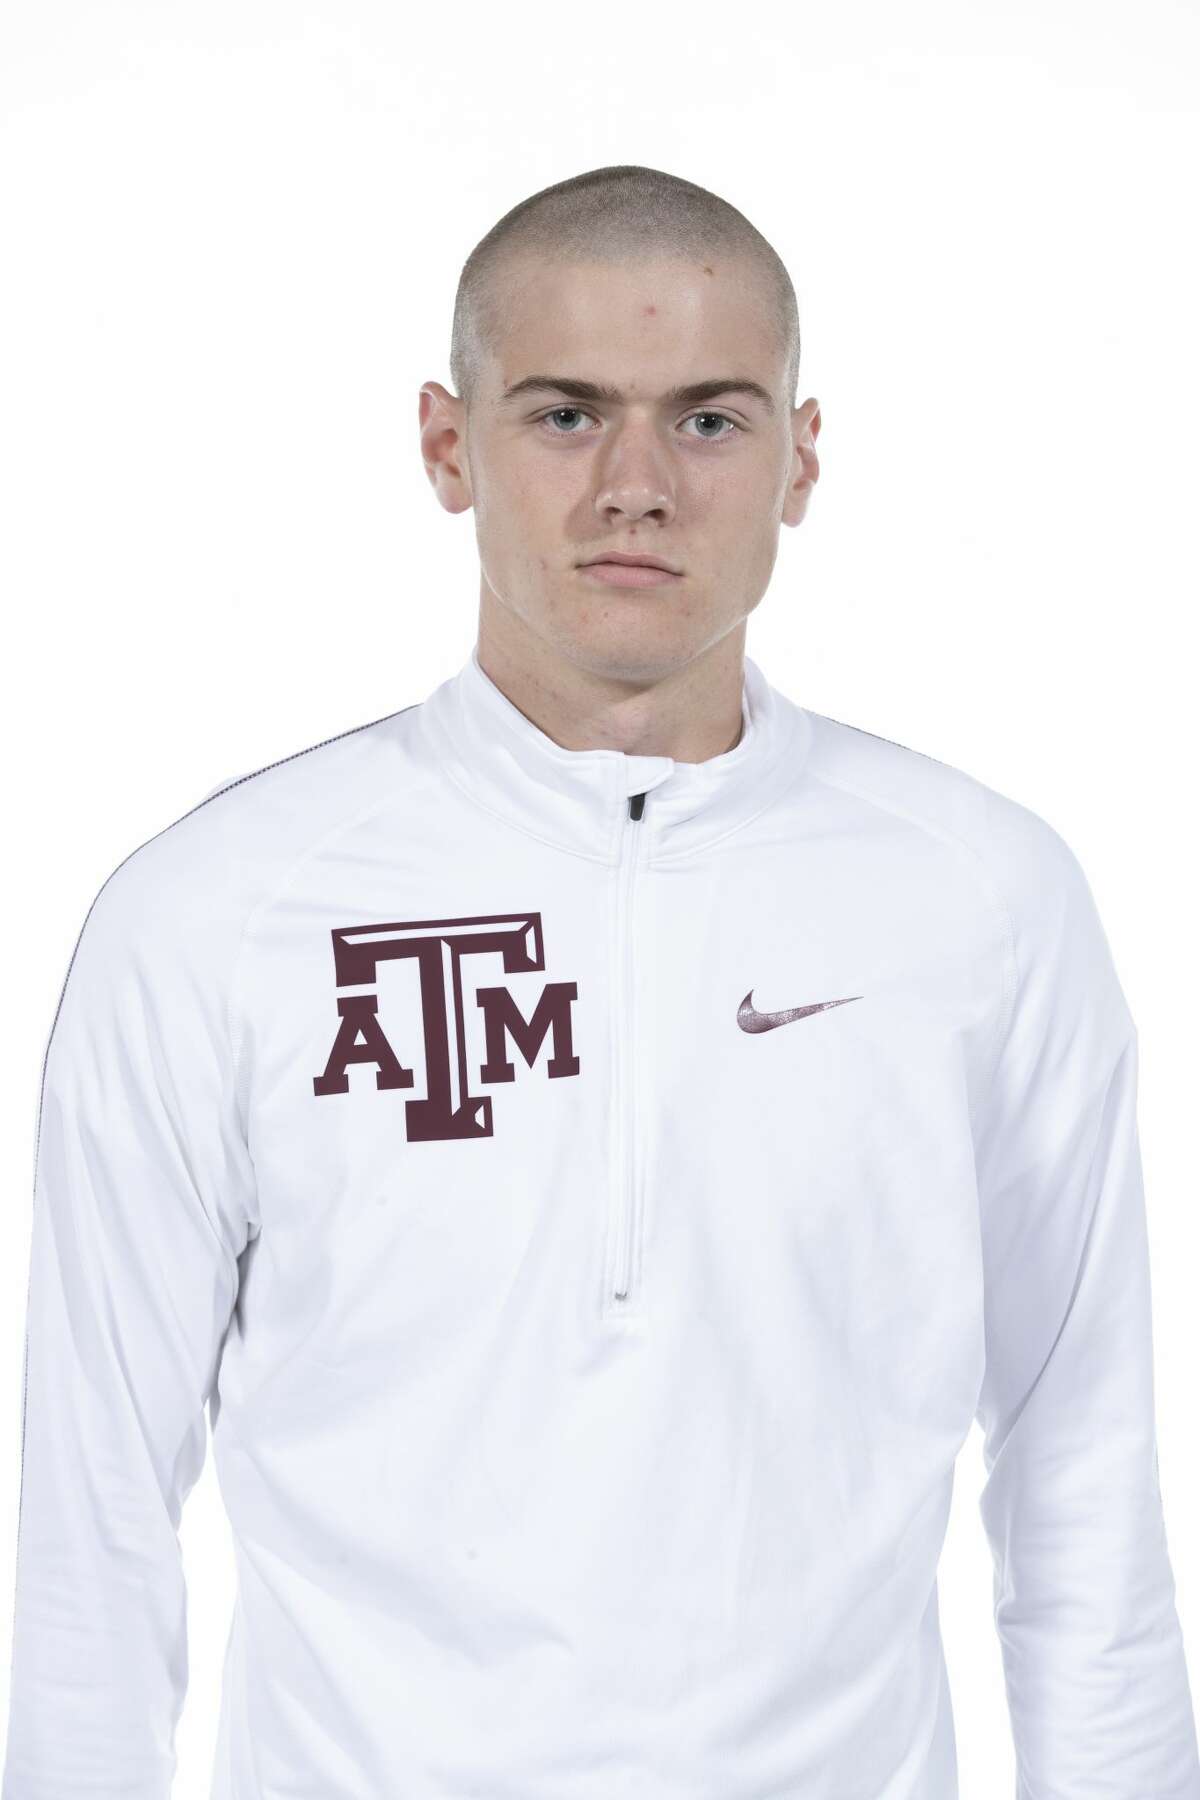 COLLEGE STATION, TX - August 20, 2021 - Chance Gibson of the Texas A&M Aggies during Texas A&M Aggies Cross Country Headshot day at The Studio in Kyle Field in College Station, TX. Photo By Aiden Shertzer/Texas A&M Athletics